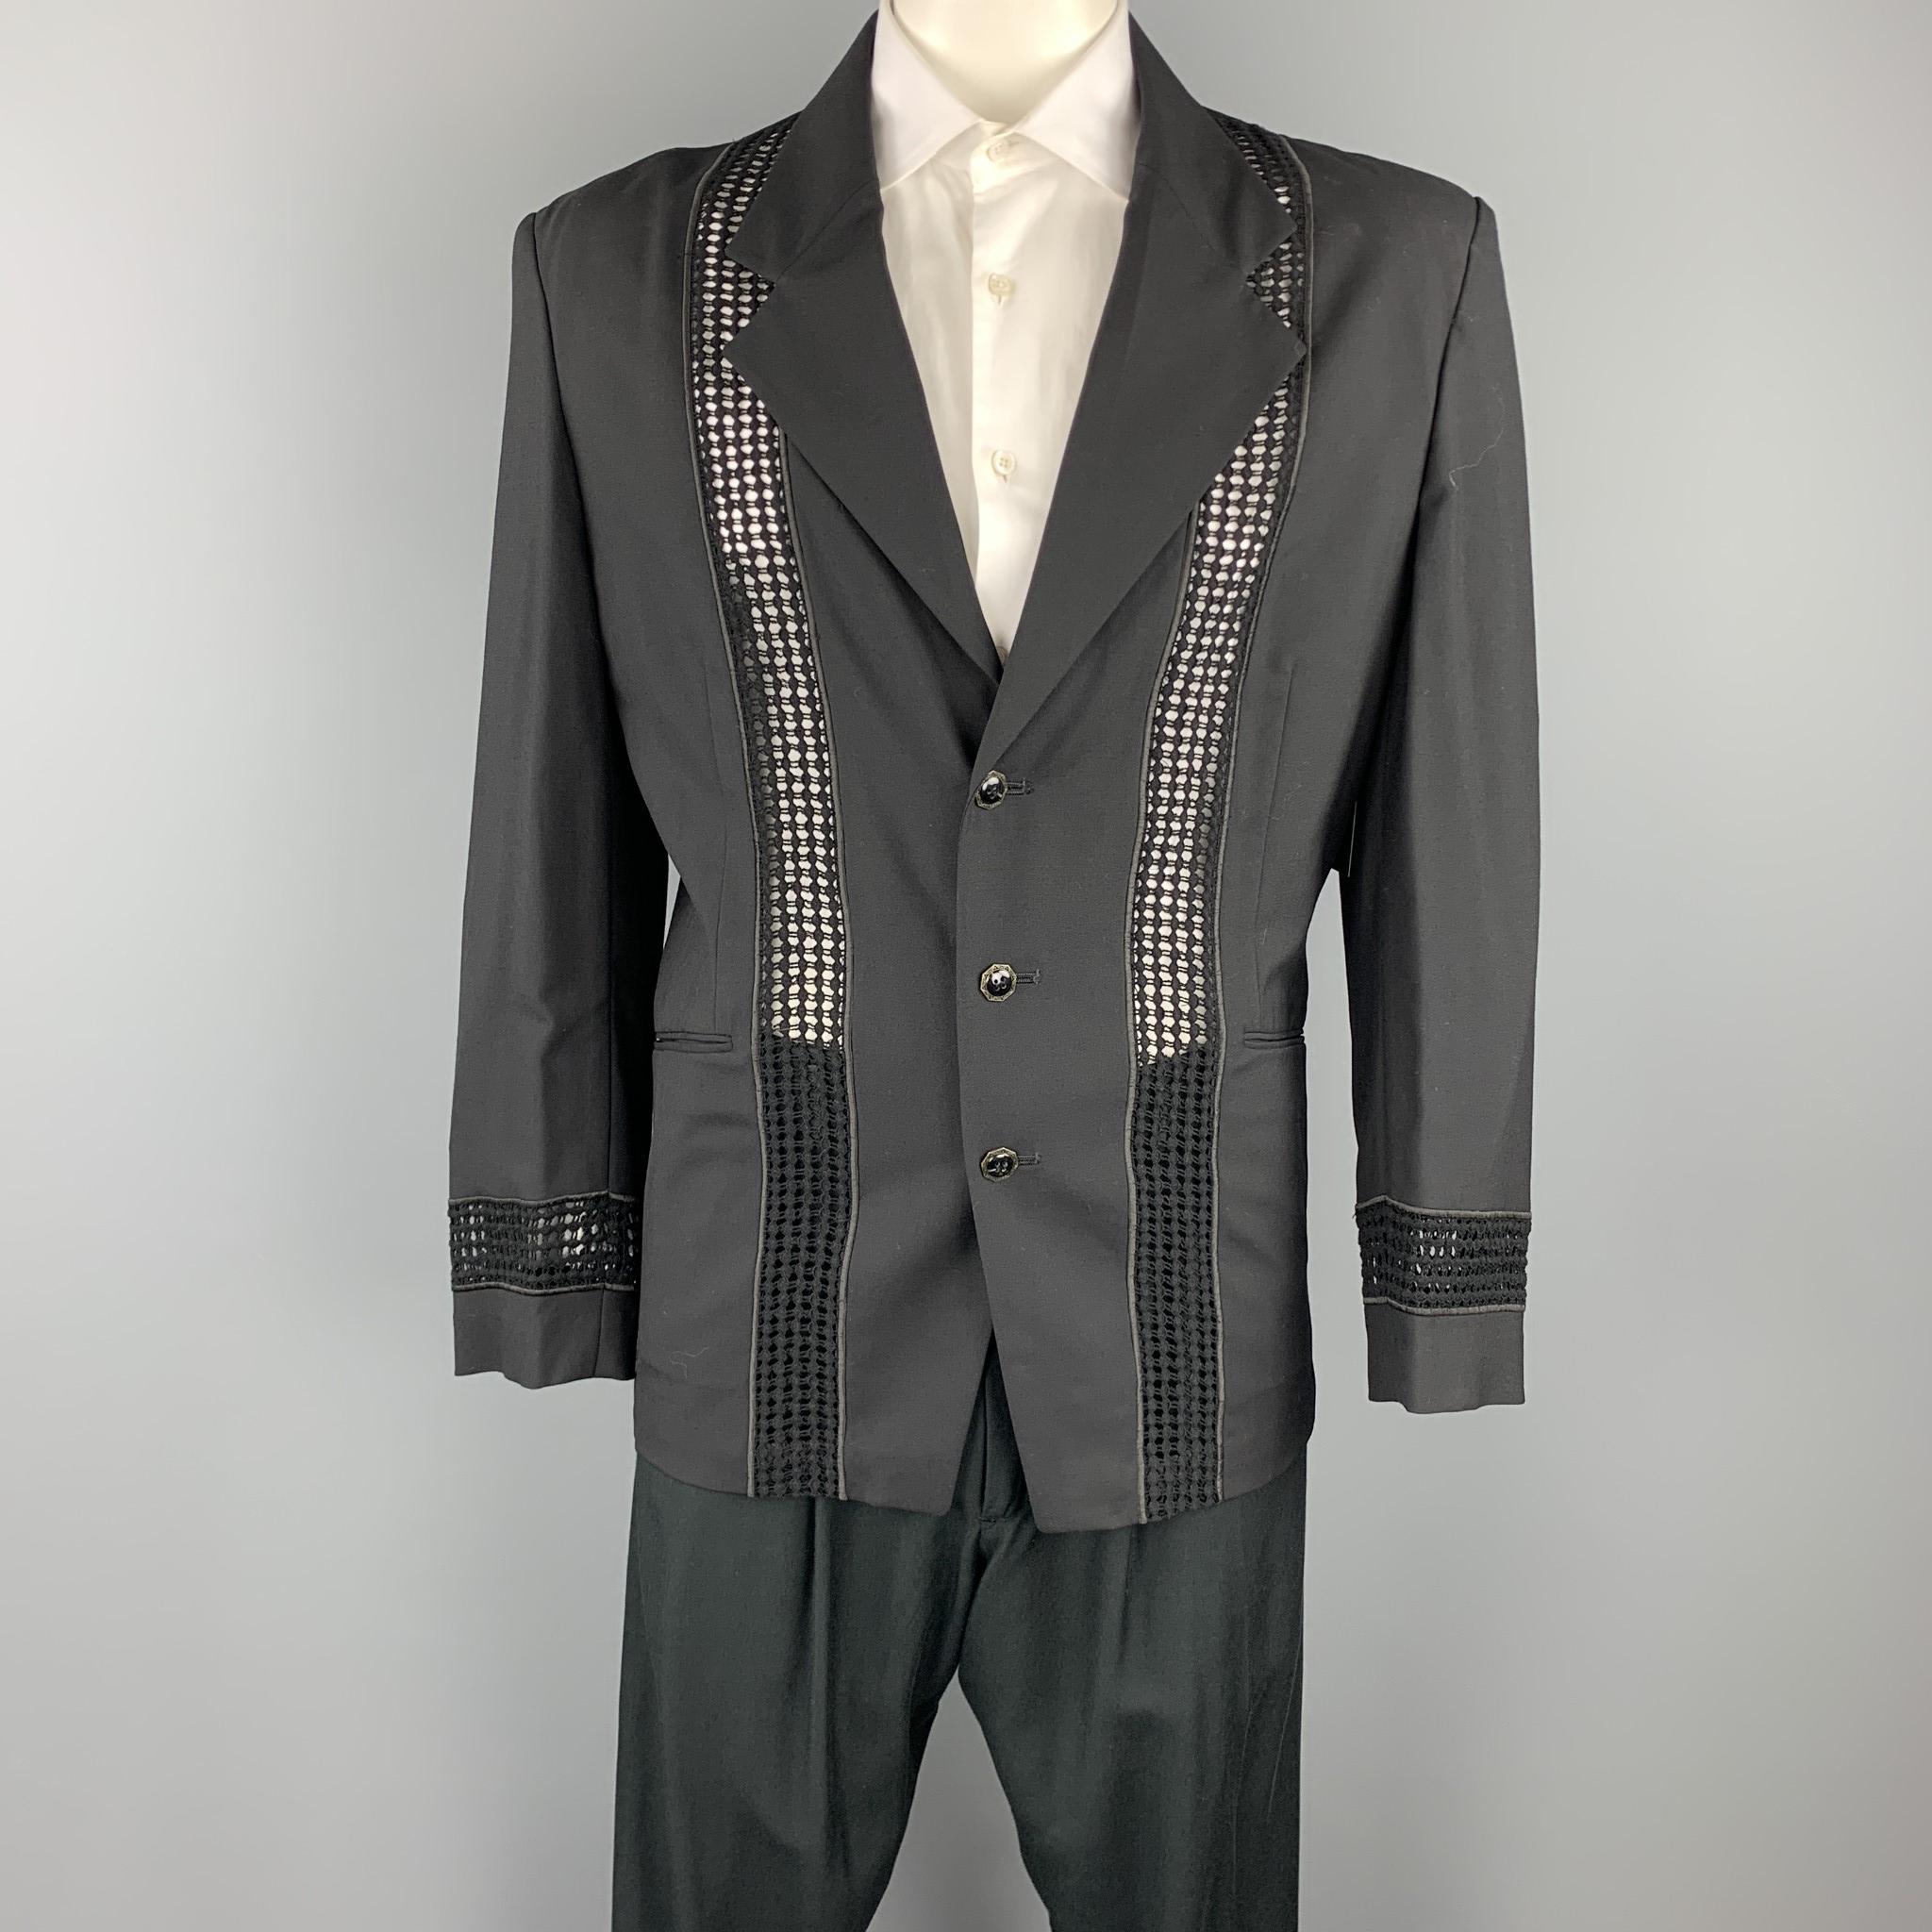 VINTAGE MATSUDA suit comes in black rayon / wool with mesh details and includes a single breasted, three button sport coat with a notch lapel and matching pleated front trousers. Made in Japan.

Very Good Pre-Owned Condition.
Marked: No size marked